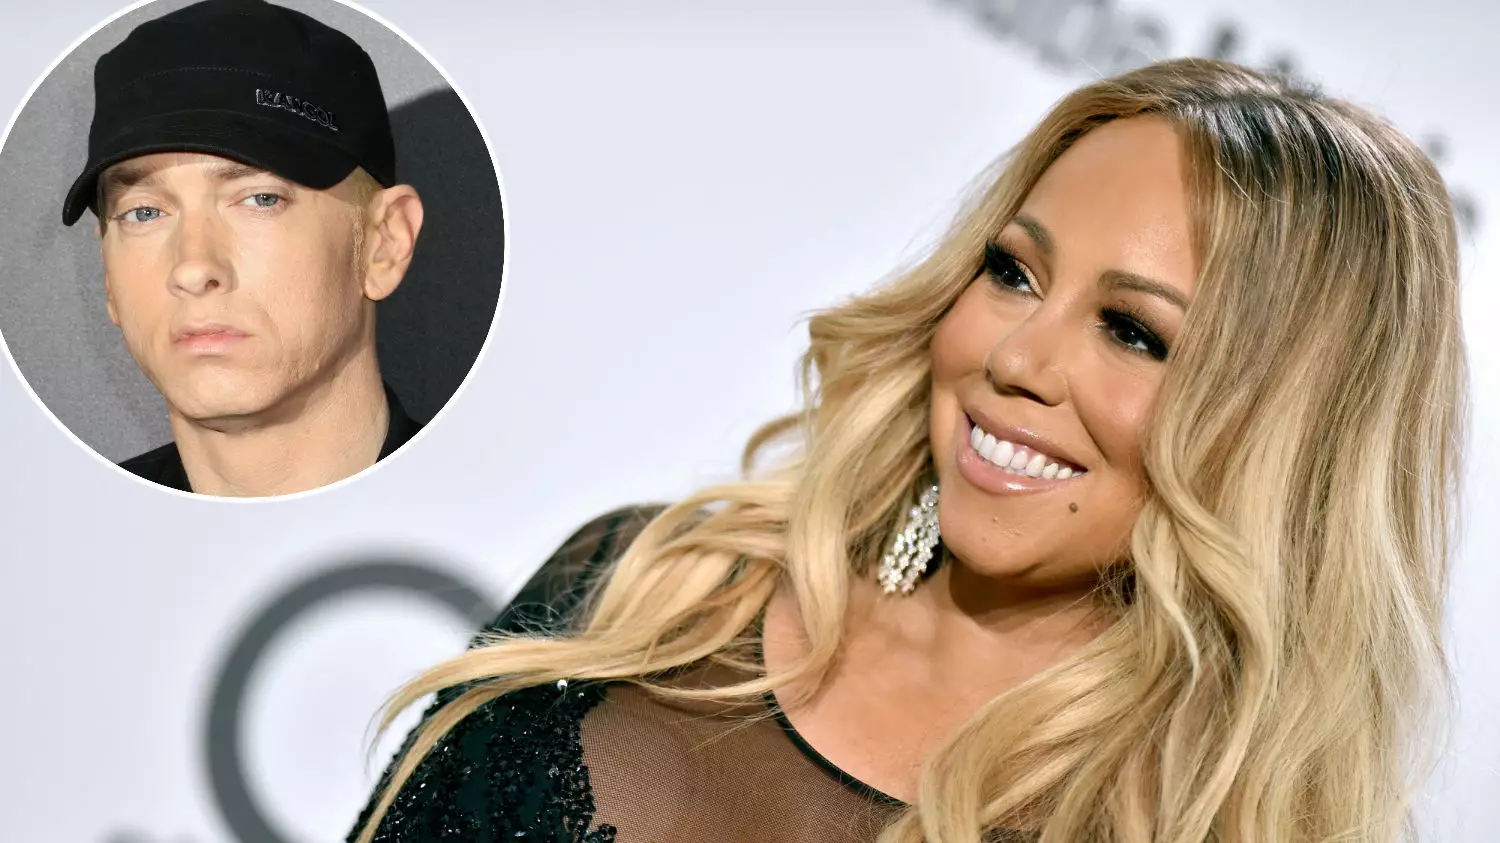 Someone Hacked Mariah Carey's Twitter Account And Tweeted About Eminem's Penis